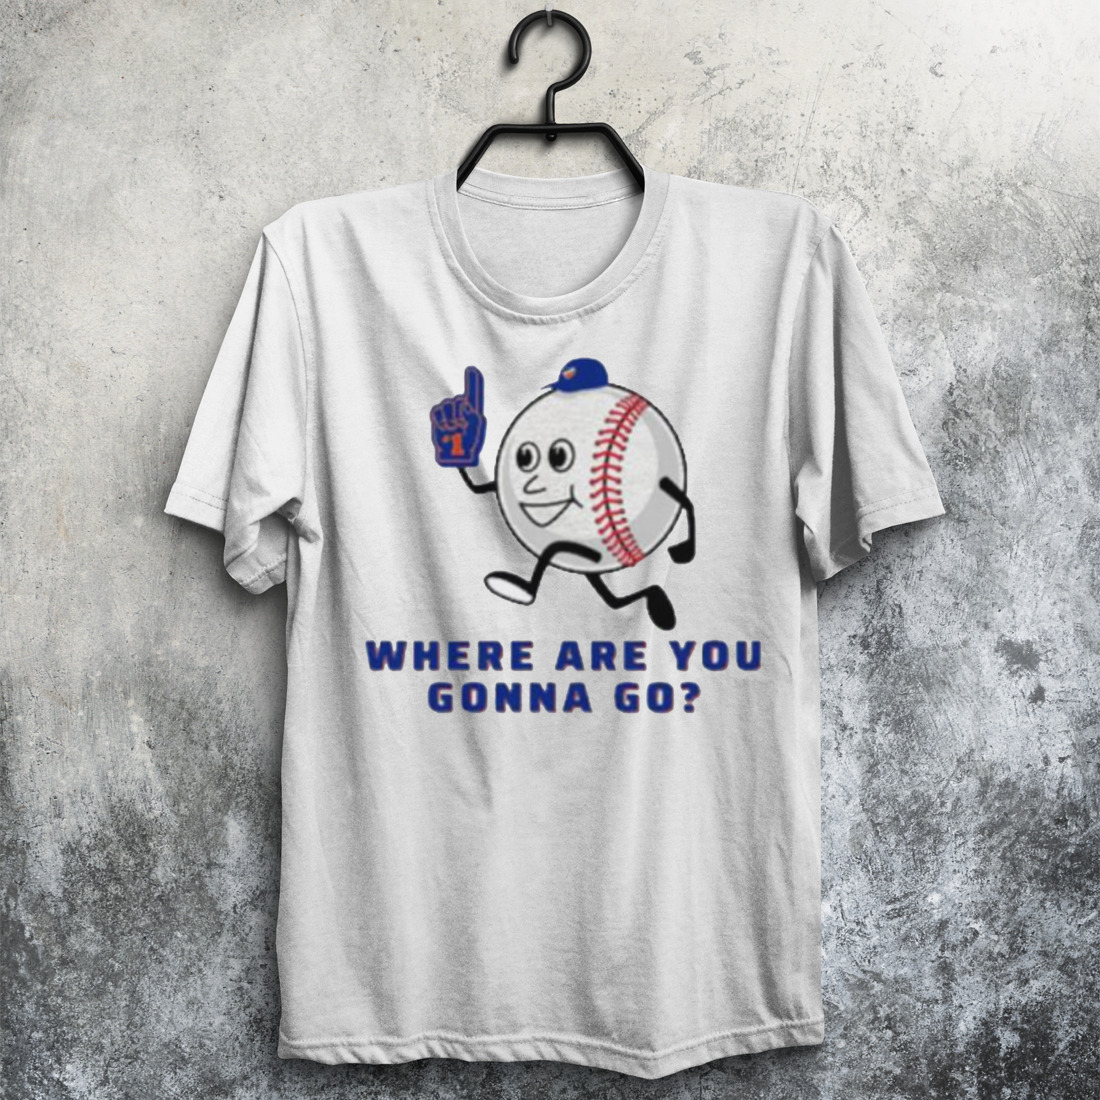 Where are you gonna go shirt